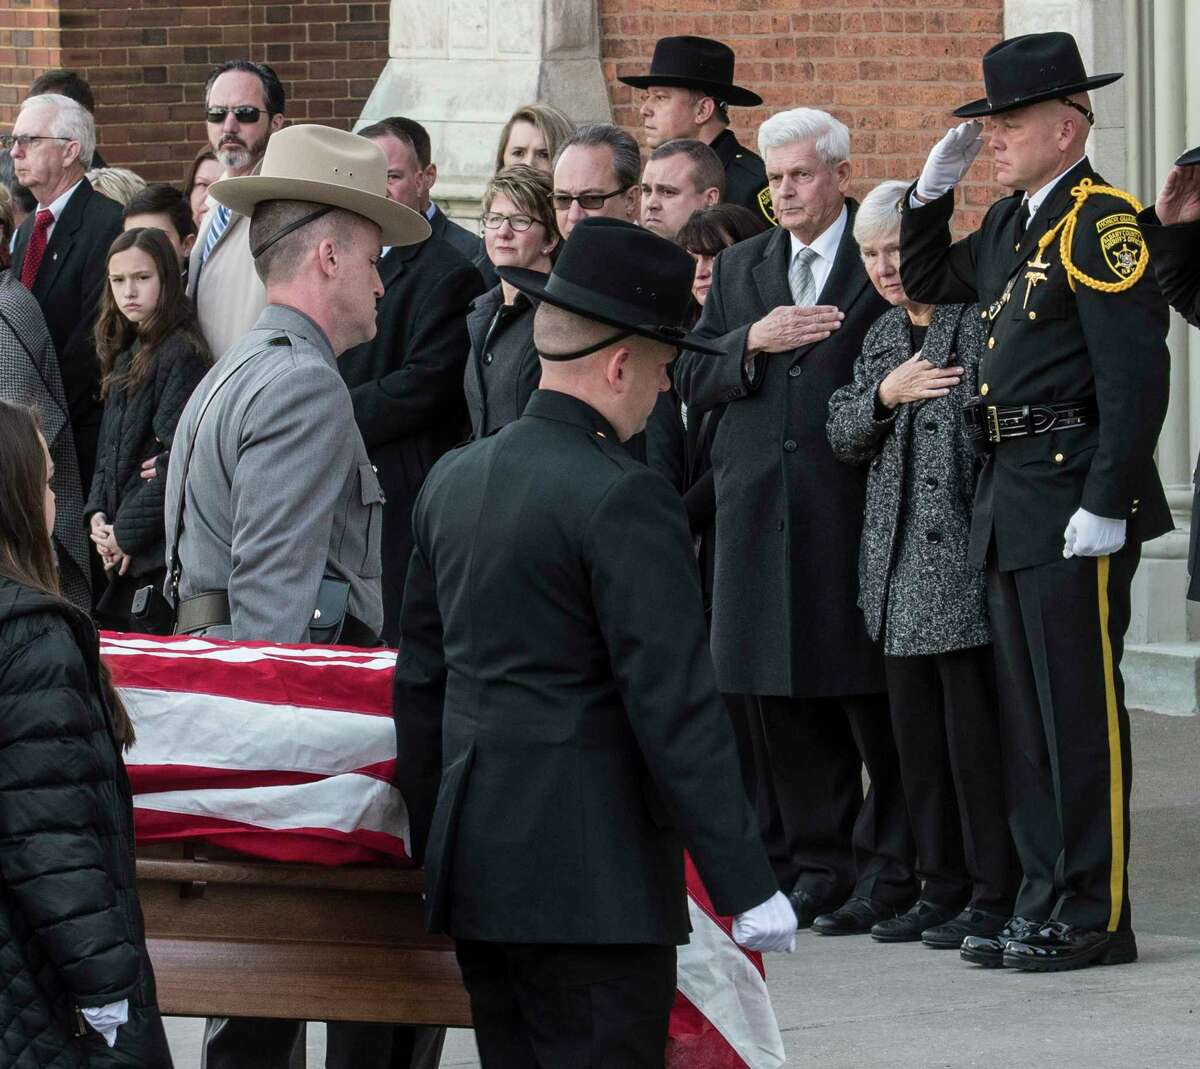 Pall bearers carry the casket carrying the remains of former Albany County Sheriff past his wife, Pat, second from right, to St. Mary's Church before his funeral ceremony Tuesday March 27, 2018 in Albany, N.Y. (Skip Dickstein/Times Union)